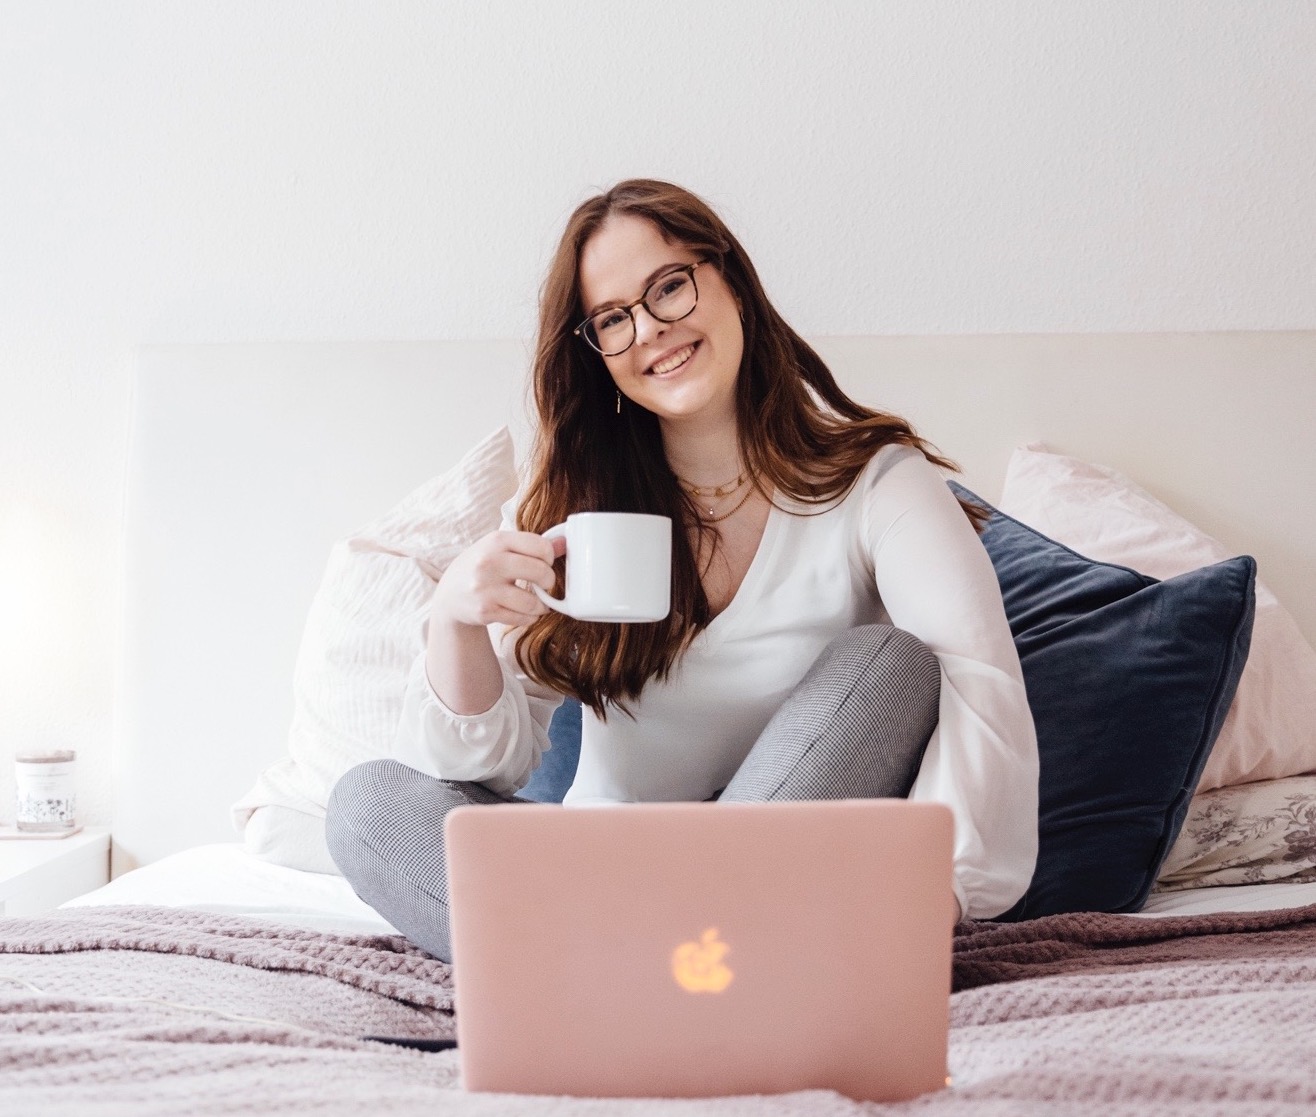 Women sitting on a bed drinking coffee. Entrepreneur. Marketing. podcast. blogger